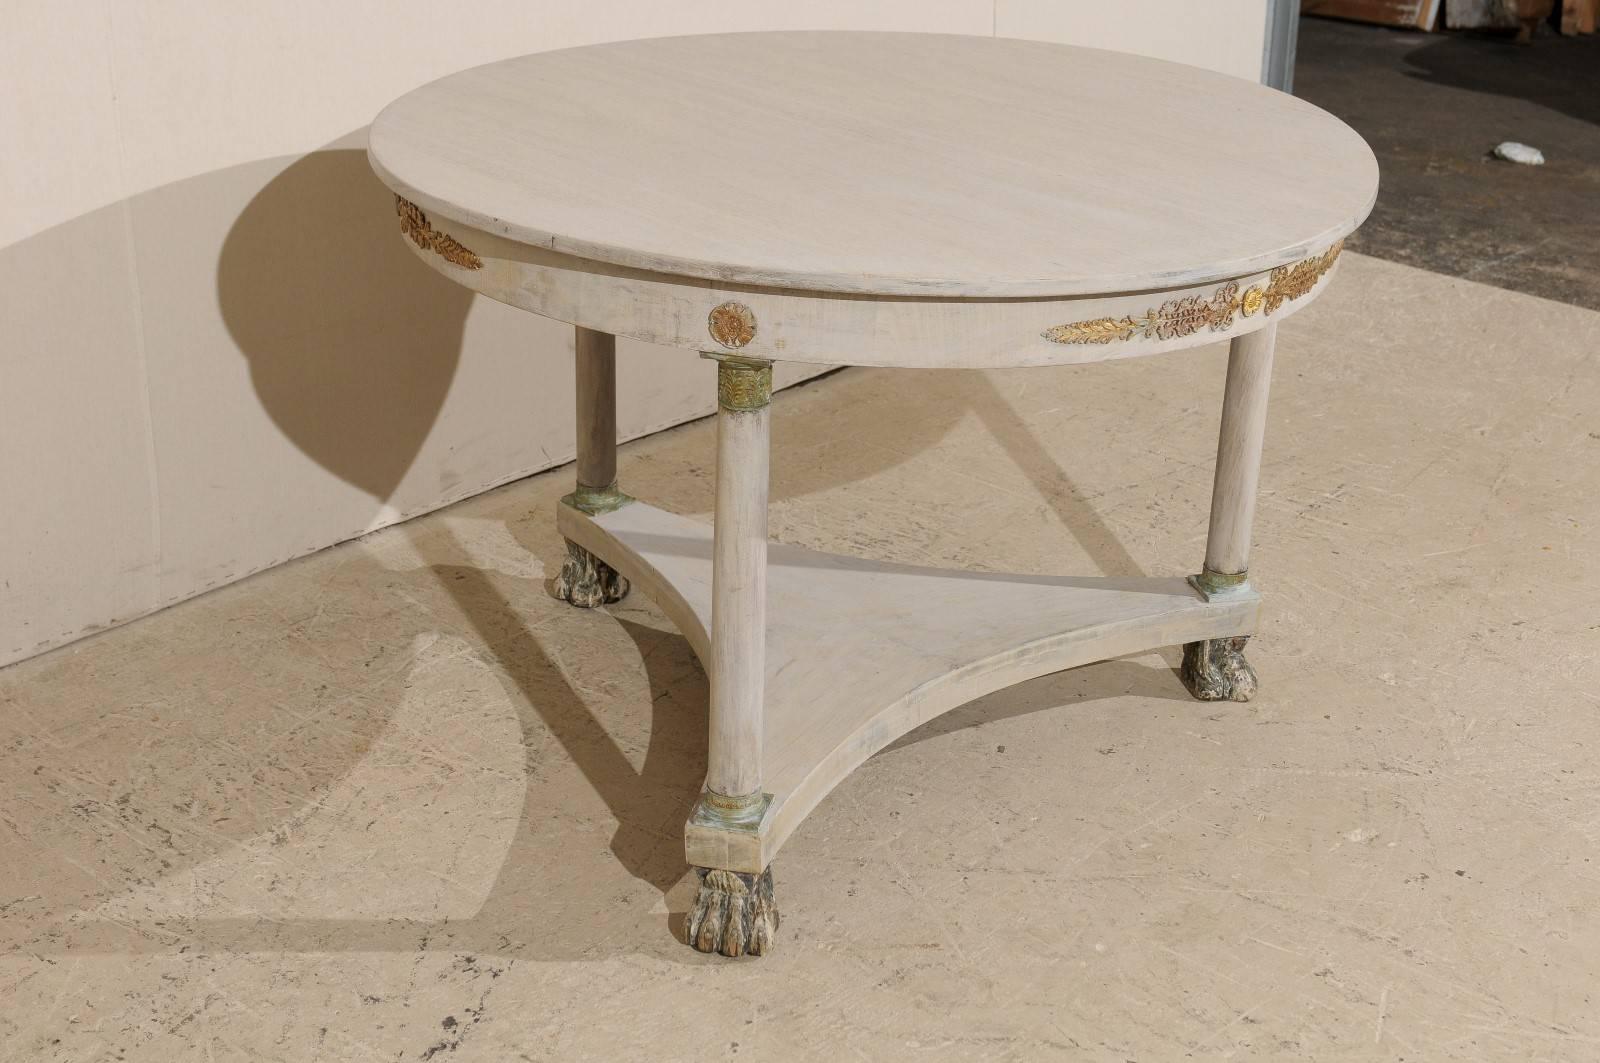 Painted French Round Wood Centre Table, Brass Accents and Lion Paw Feet, Neutral Color